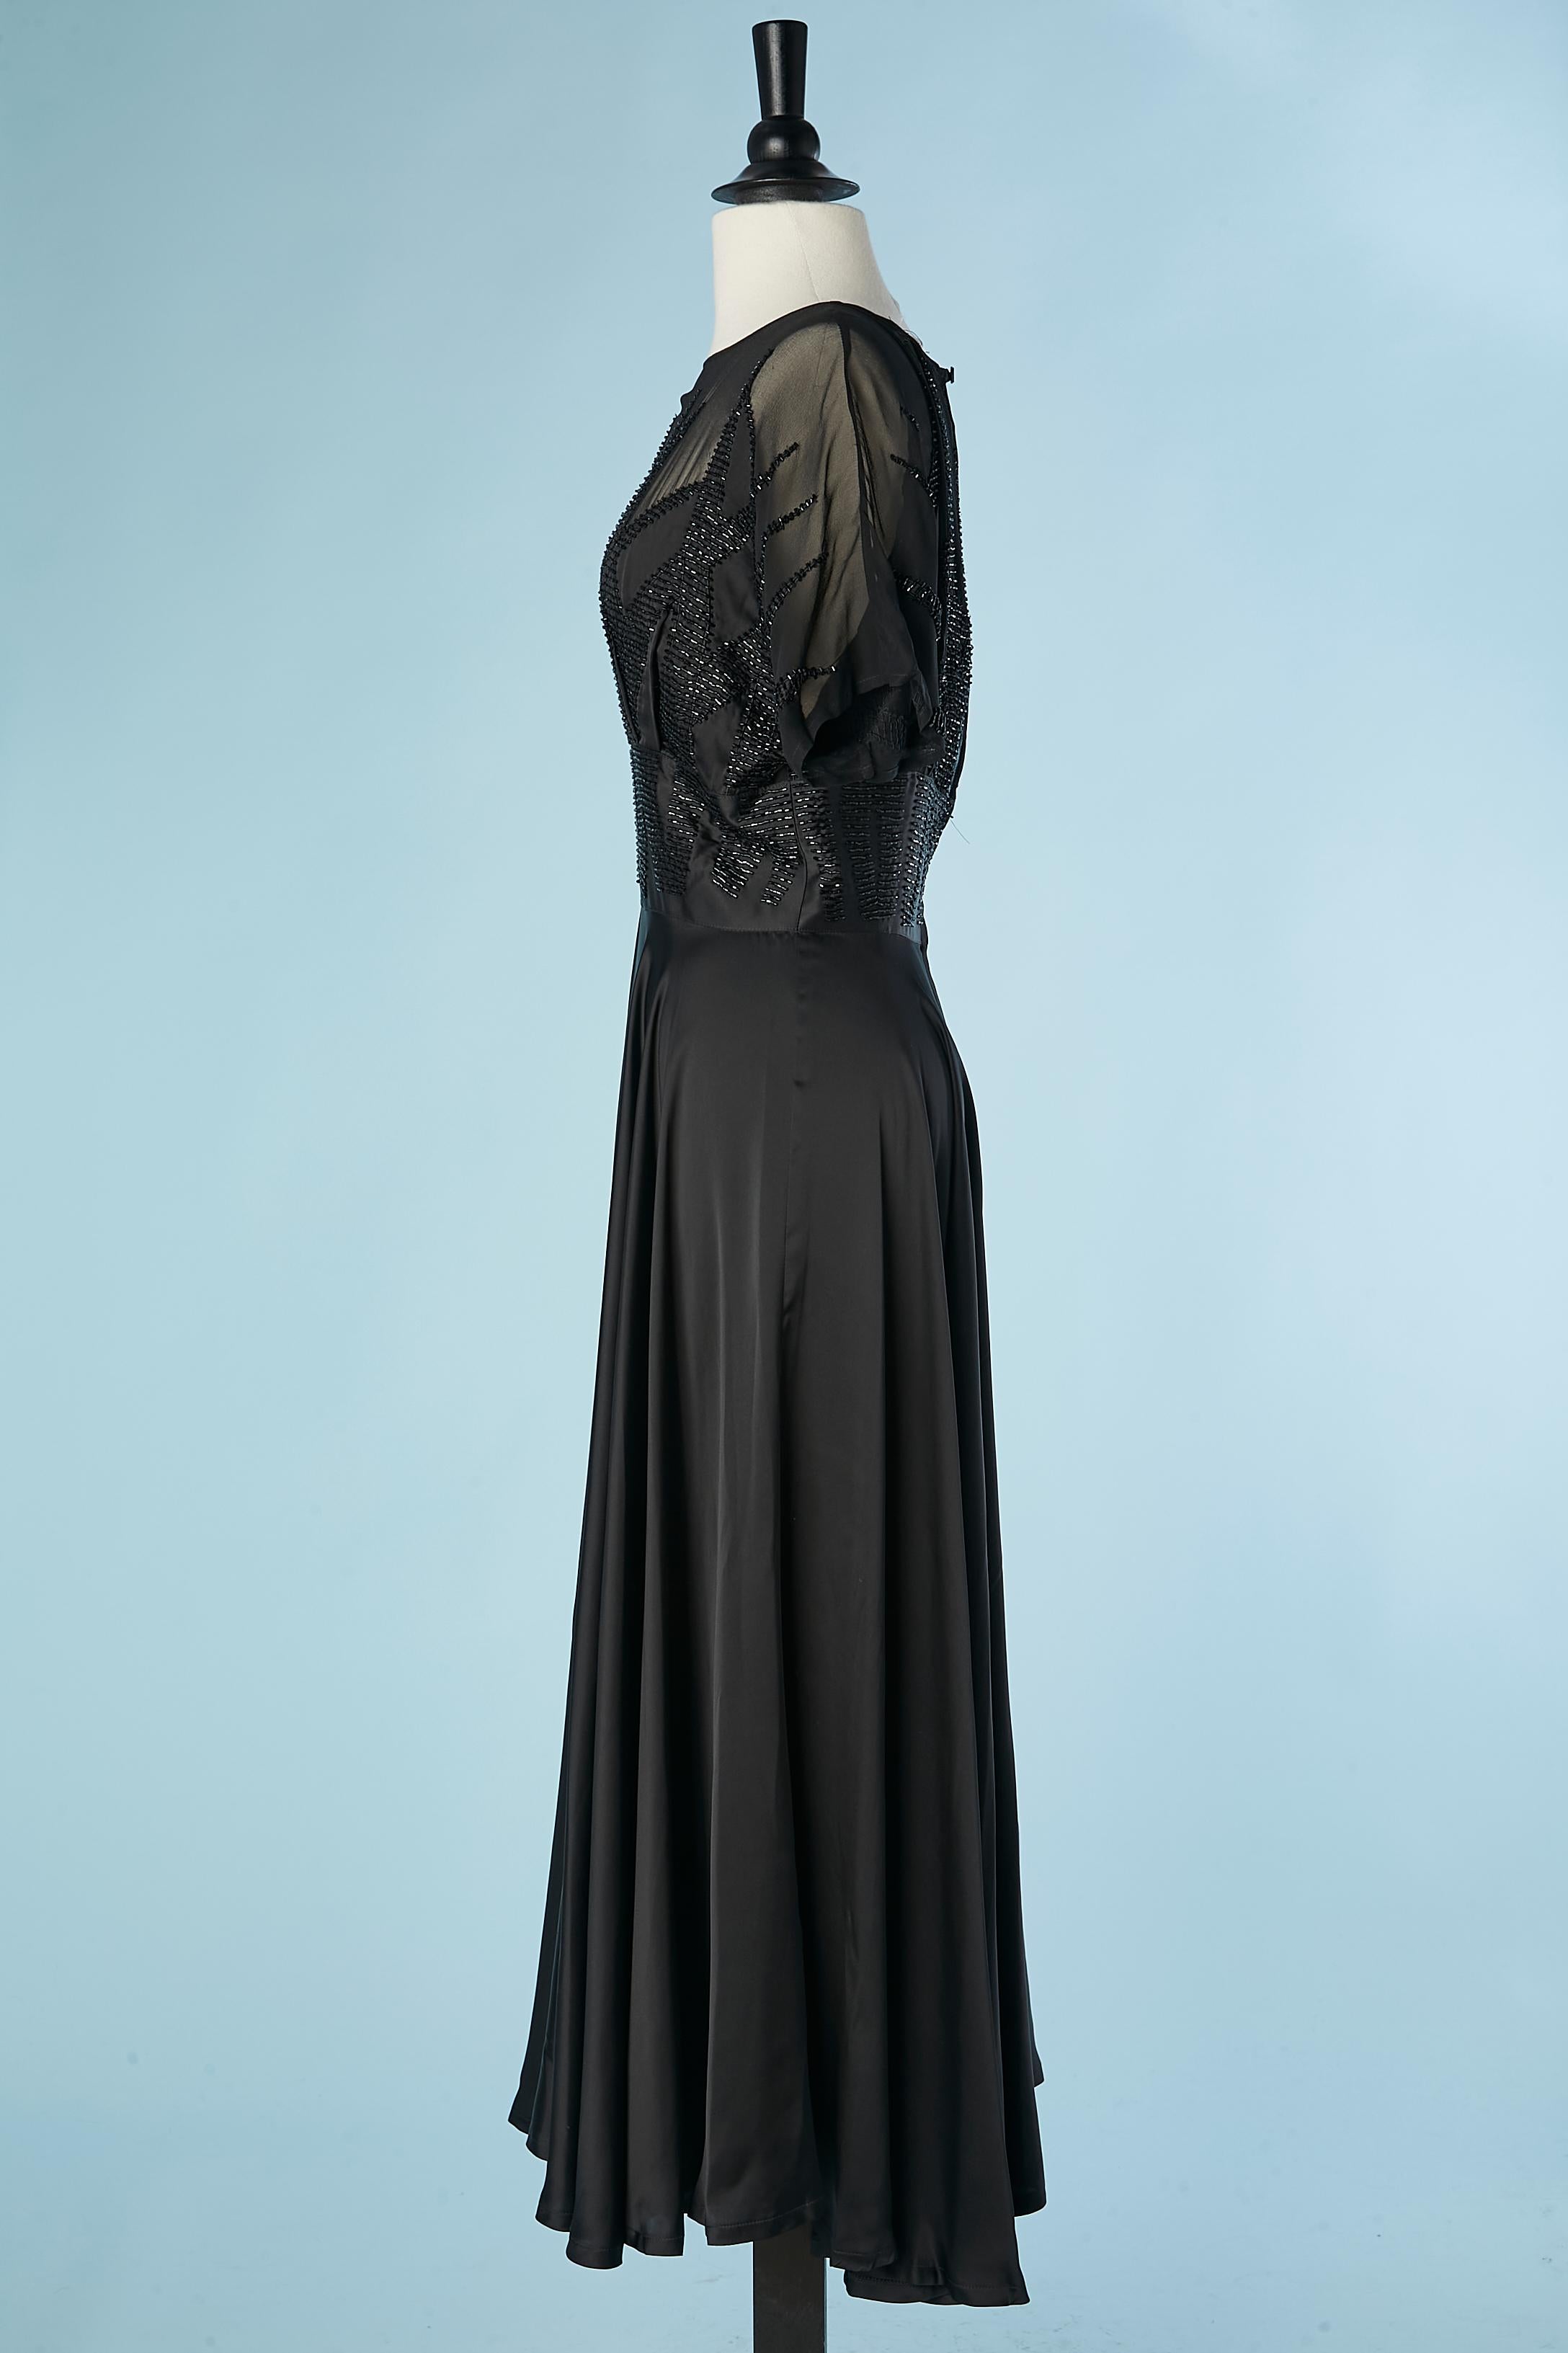 Women's Evening dress in chiffon and satin with beadwork Nancy Johnson  For Sale